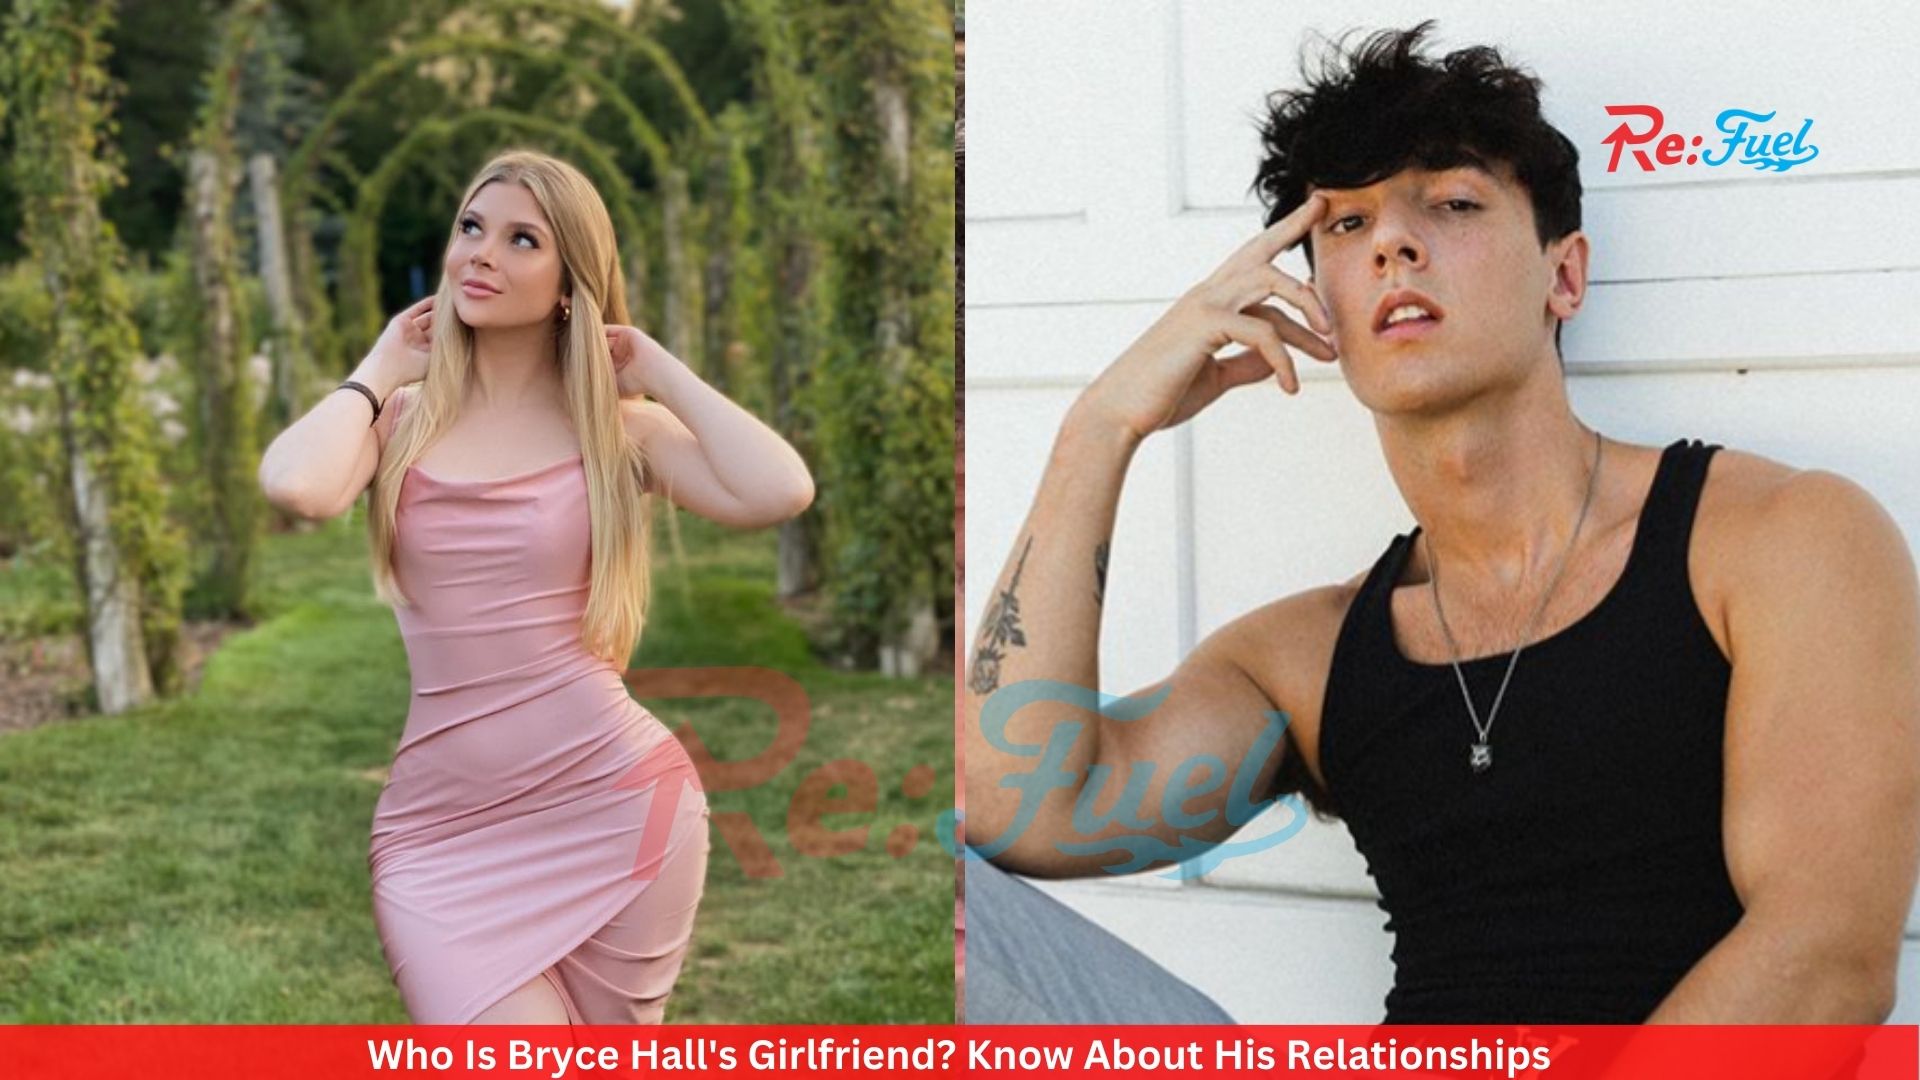 Who Is Bryce Hall's Girlfriend? Know About His Relationships